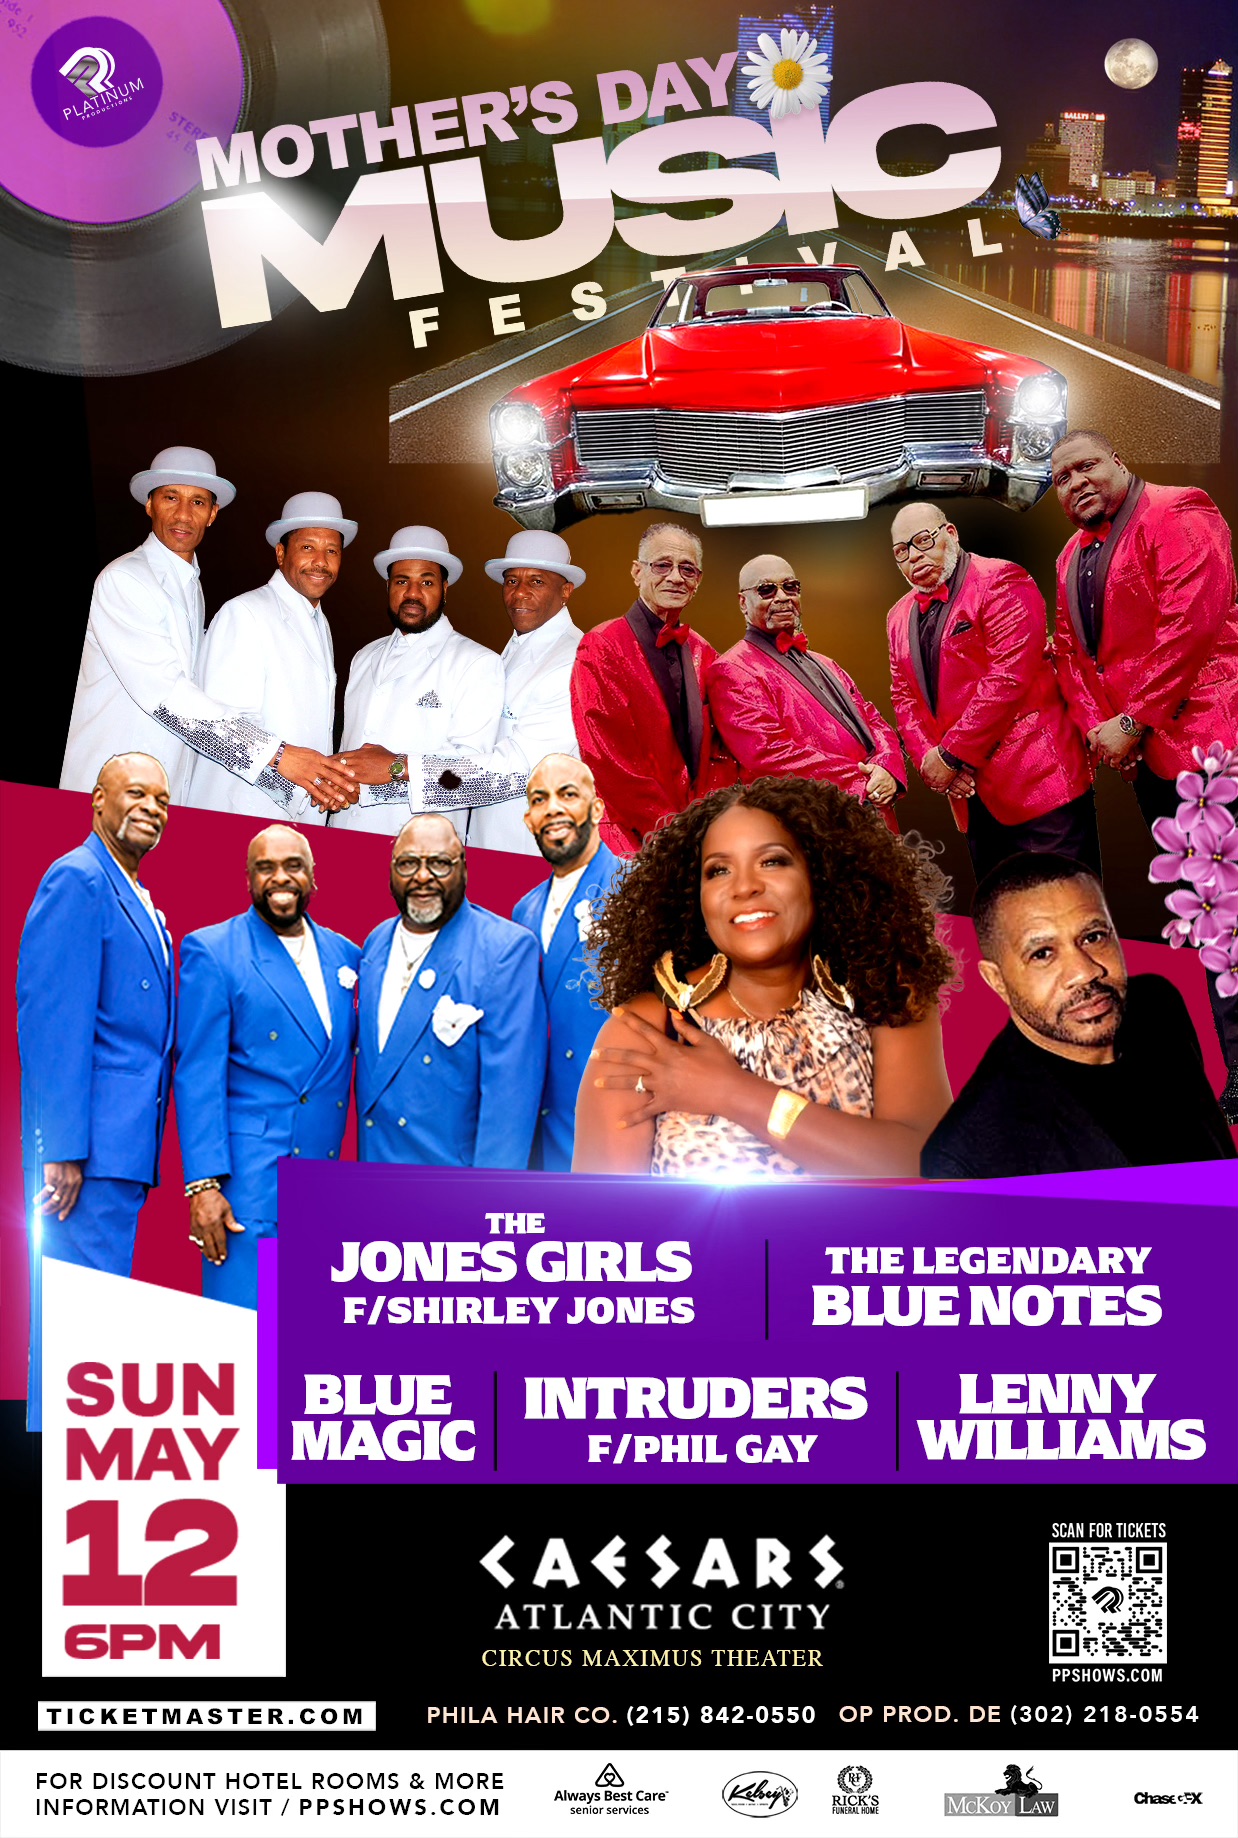 Purchase tickets to the Mother's Day Music Festival starring the Jones Girls and the Legendary Blue Notes!